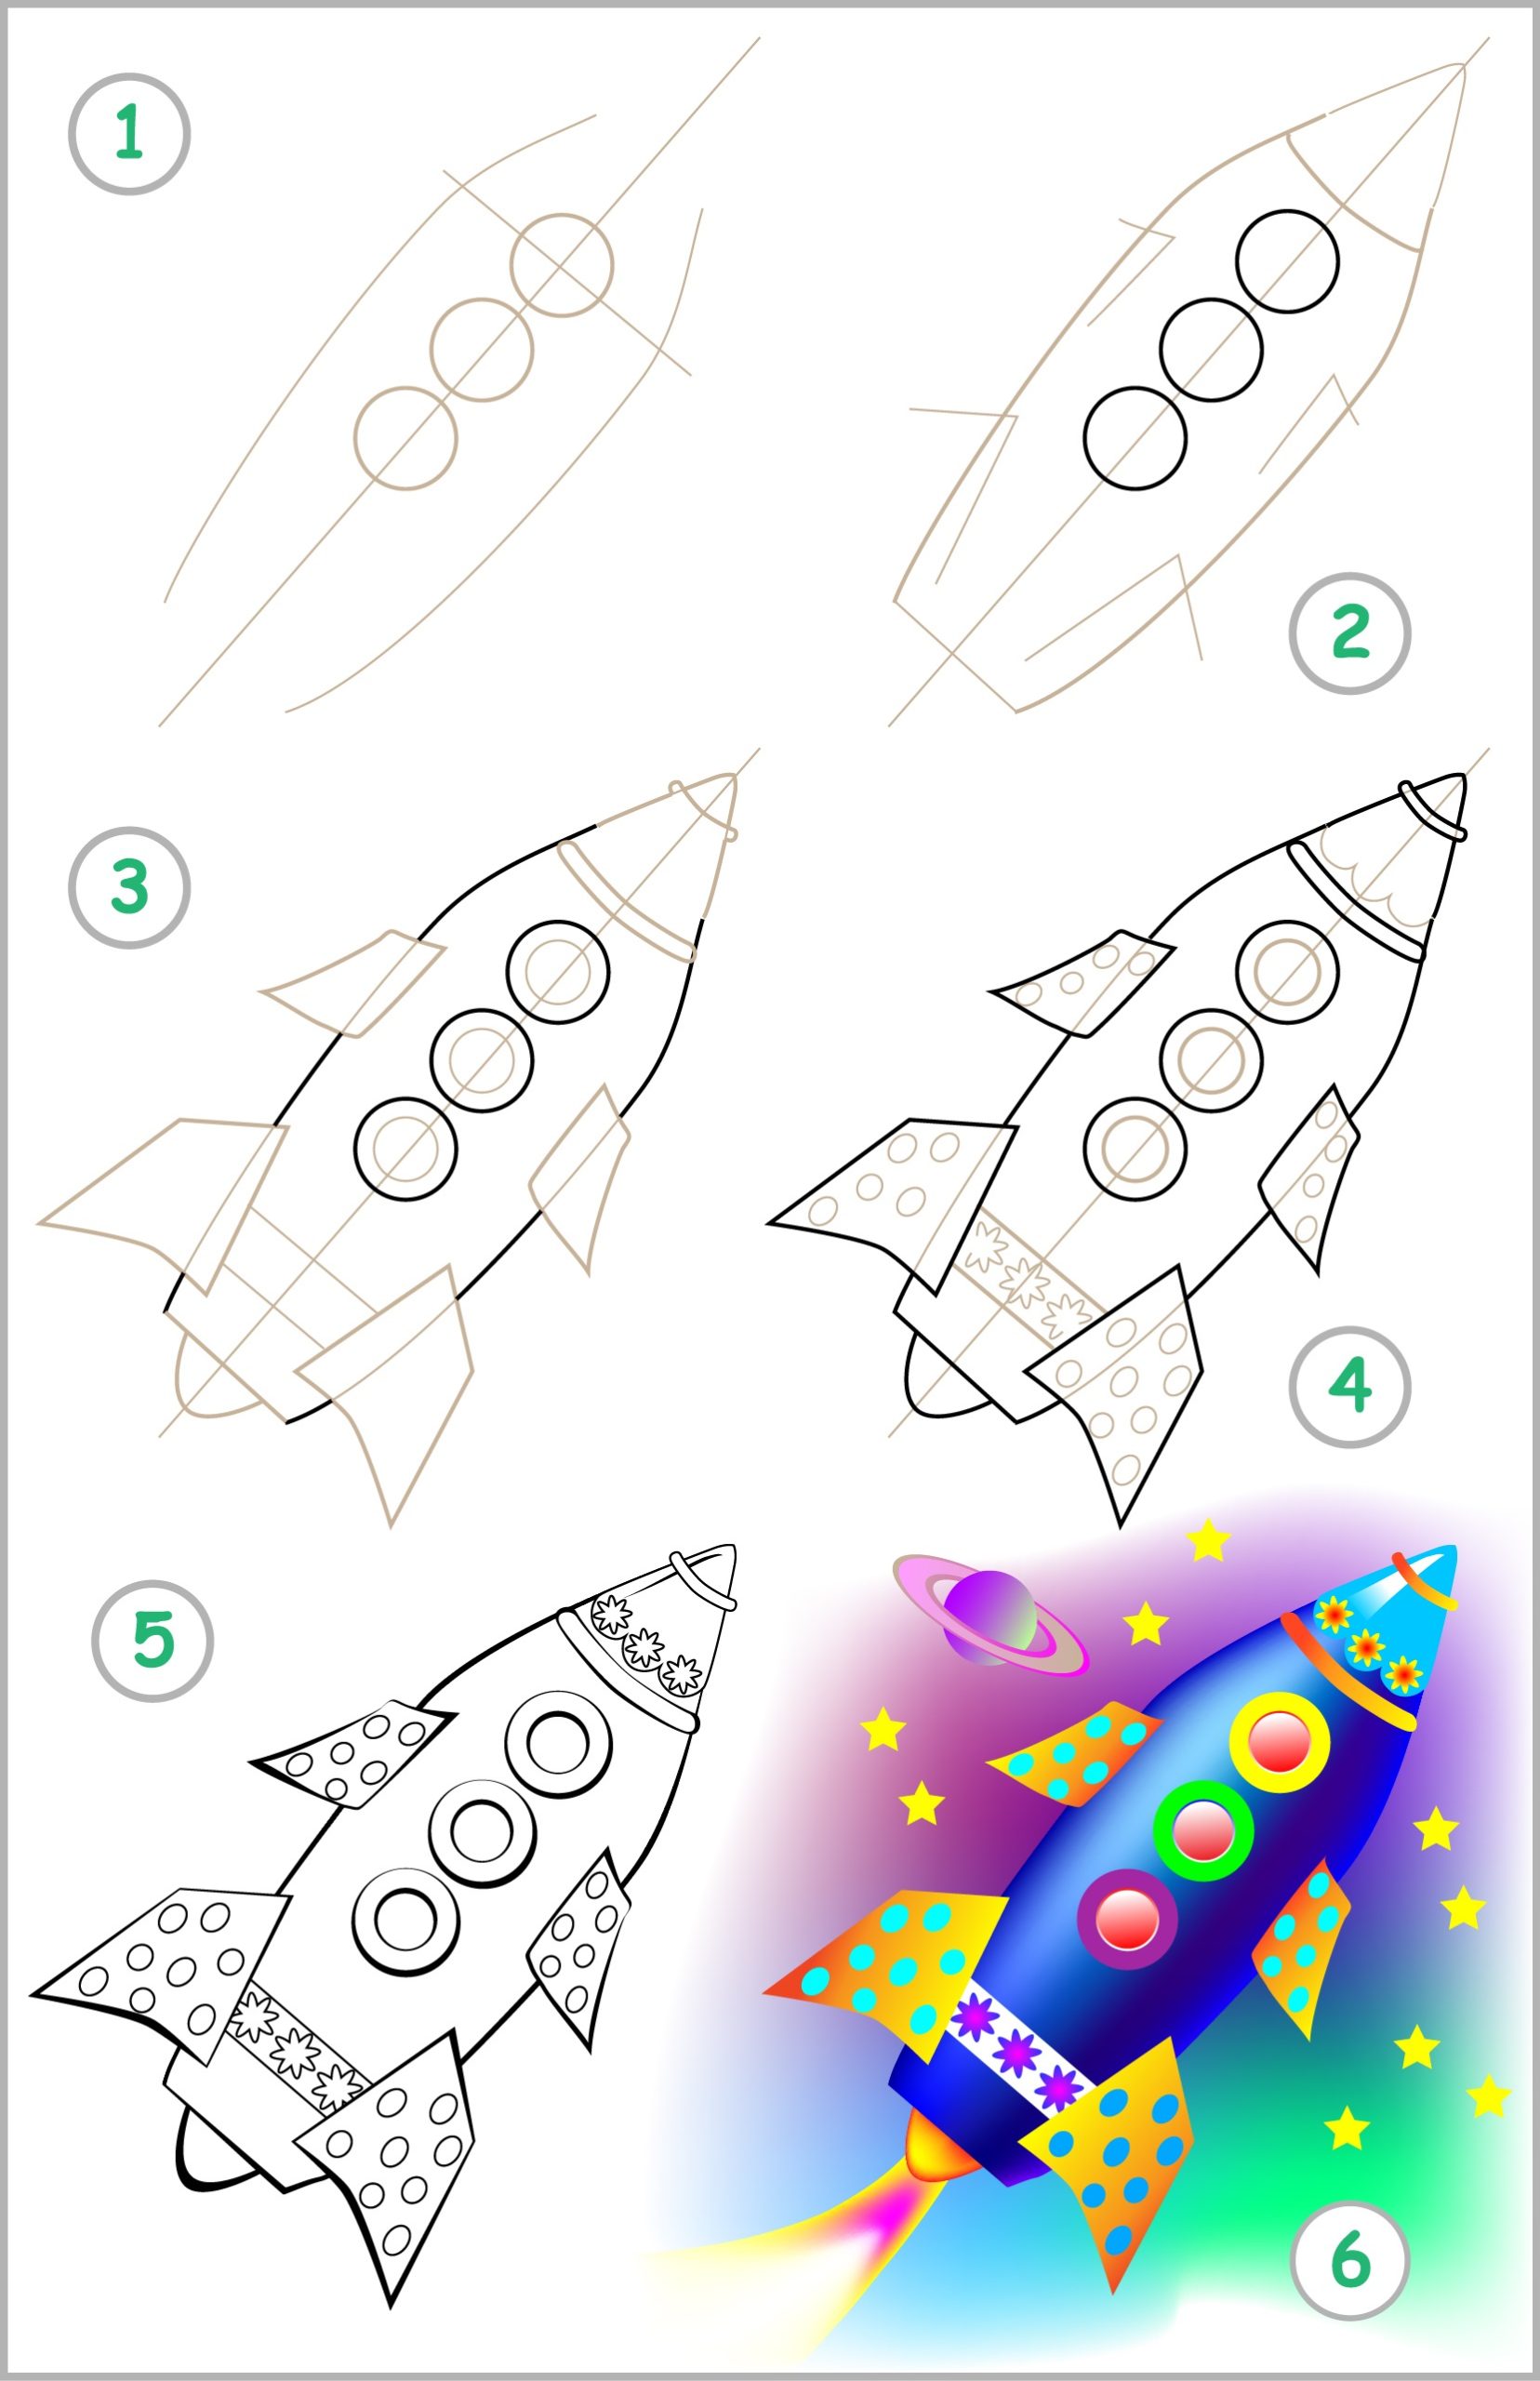 how to draw a rocket